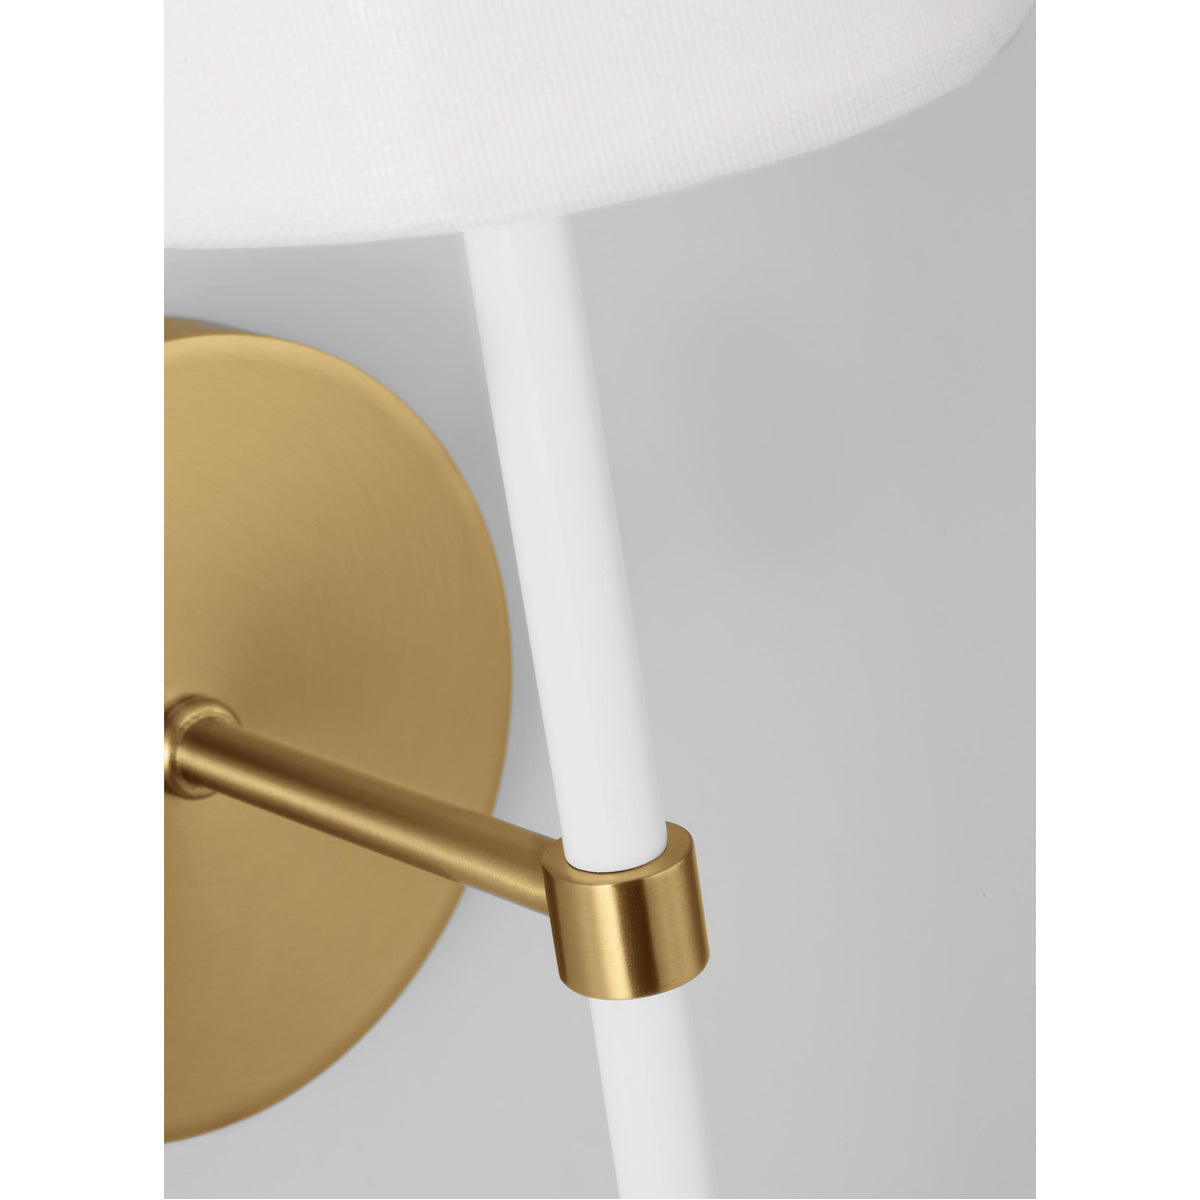 Feiss Kate Spade New York Monroe Tail Sconce